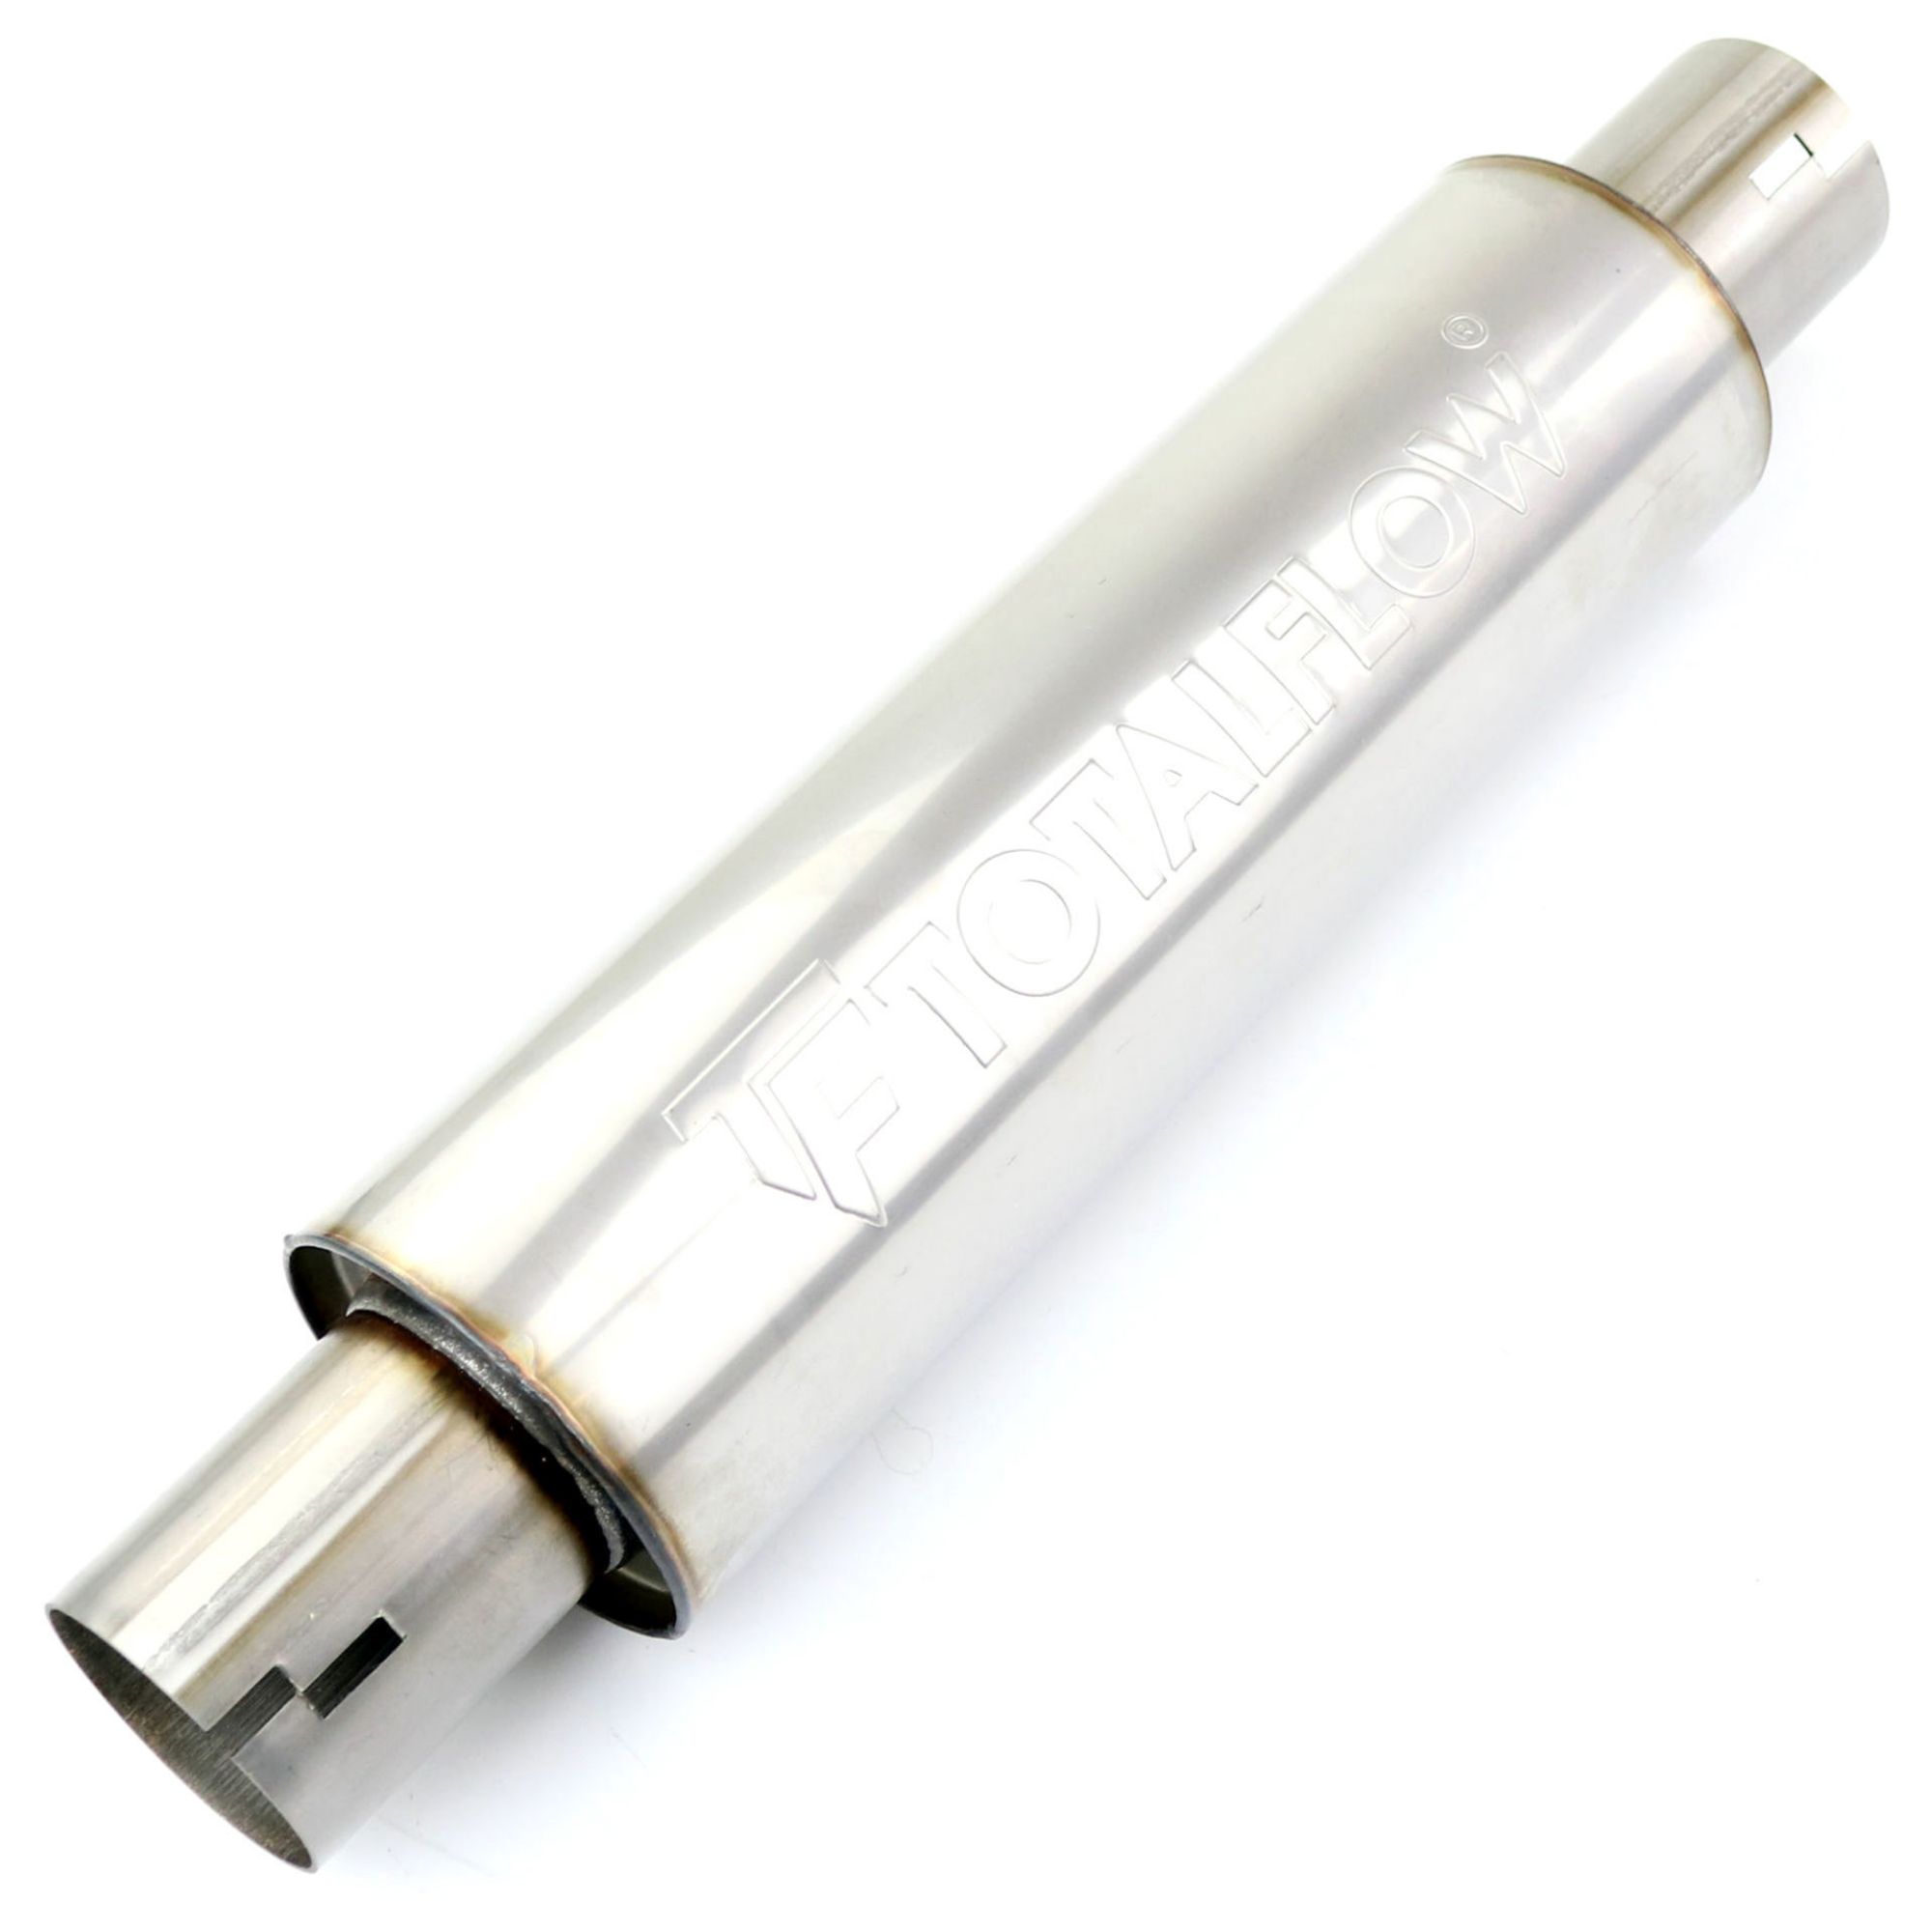 TOTALFLOW 22116N Straight Through Universal 2-1/2" Inch Notched Ends Exhaust Muffler - 2.5 Inch ID